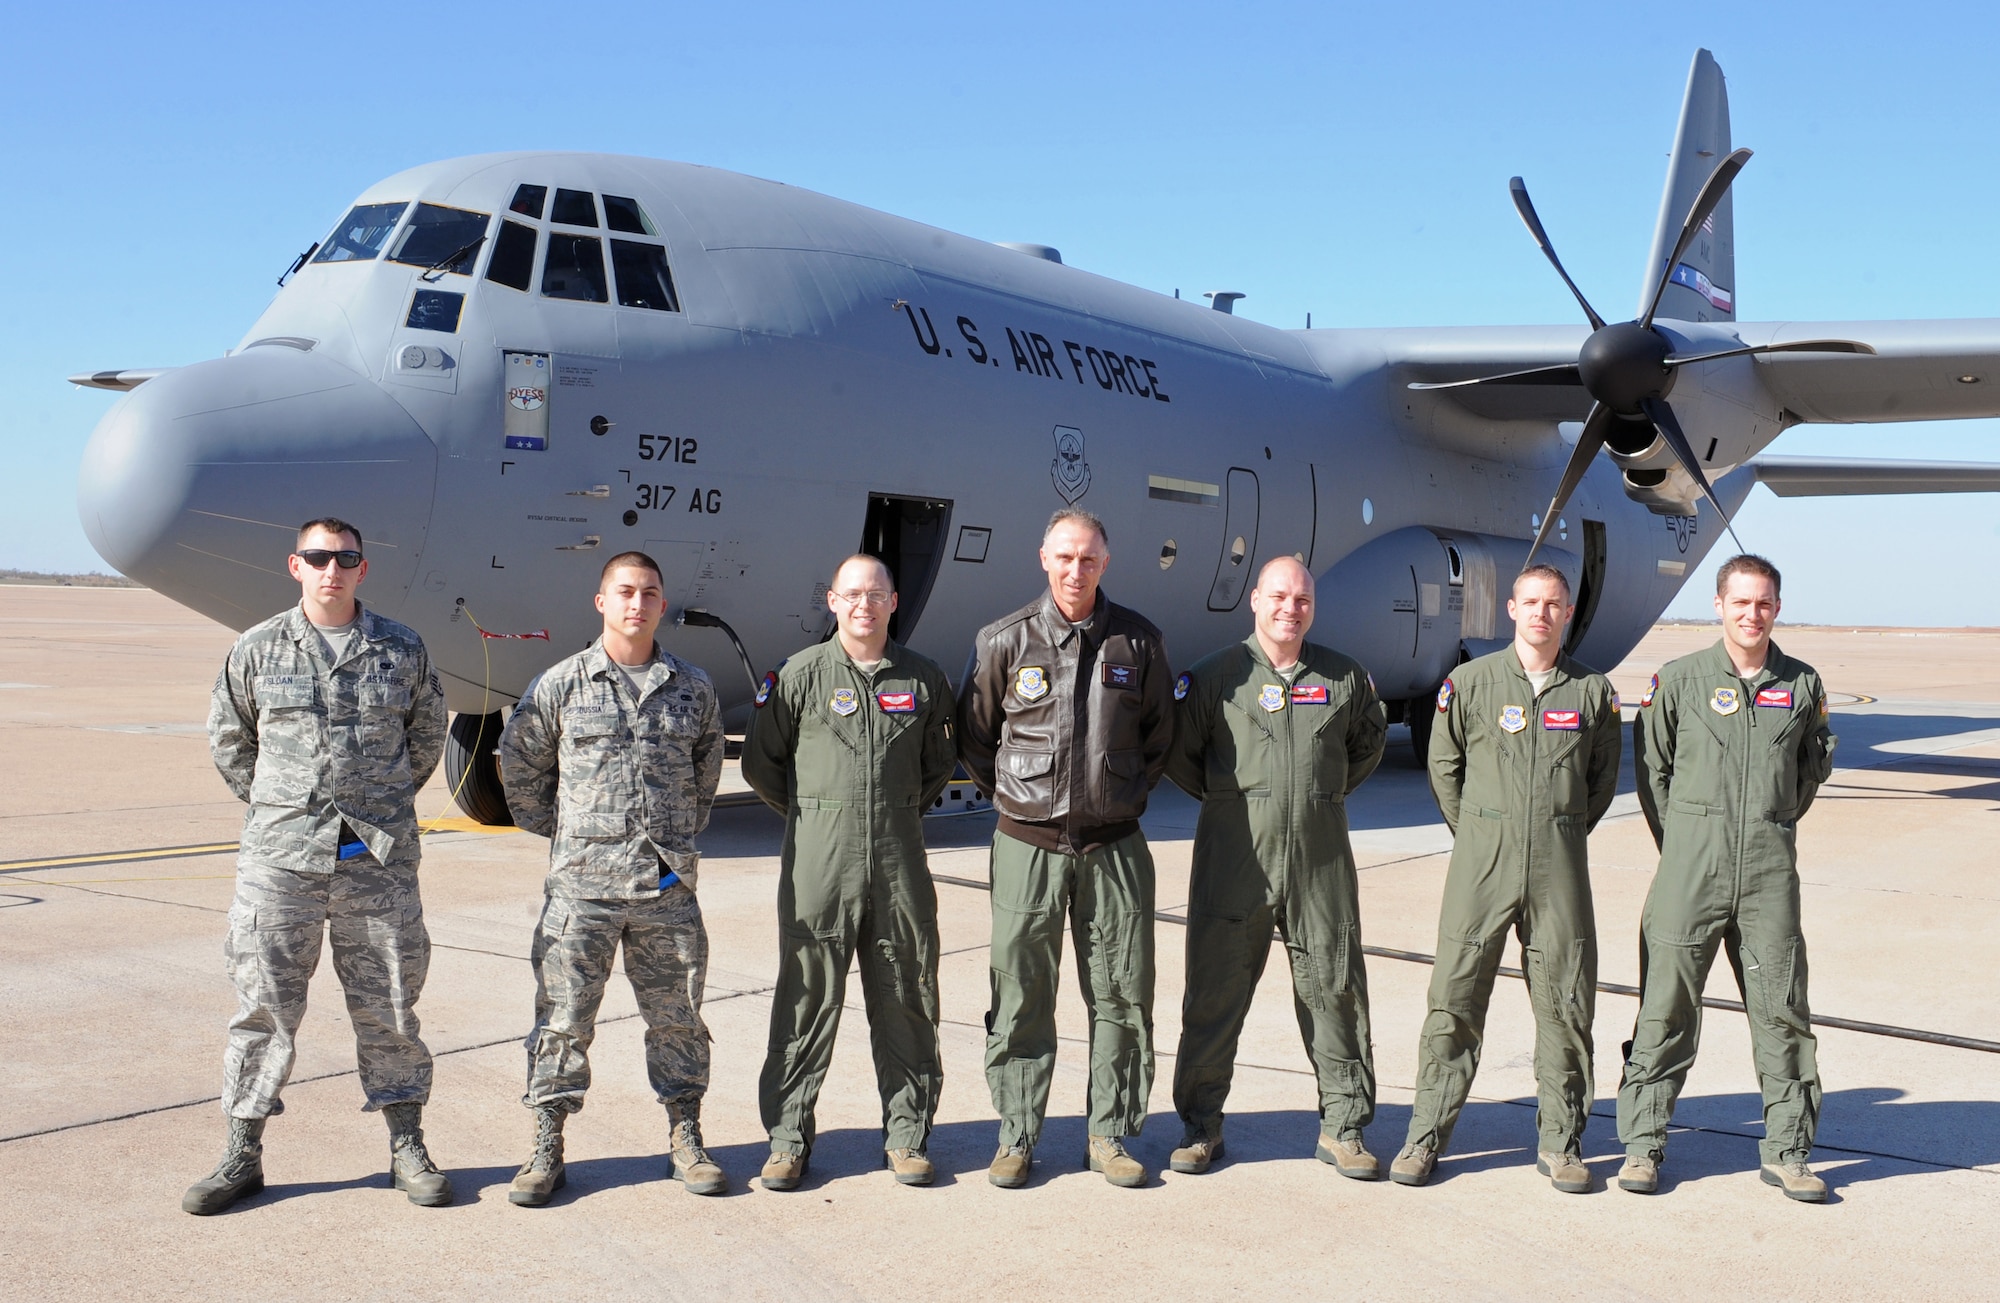 Members of the 317th Airlift Group pose for a group photo with Maj. Gen. William J. Bender, U.S. Air Force Expeditionary Center commander, after delivering the 317th AG’s newest C-130J Dec. 13, 2012, at Dyess Air Force Base, Texas. This is the 24th C-130J of 28 to be delivered to Dyess by 2013, replacing the legacy fleet of C-130Hs. Once the final aircraft is delivered, Dyess will be home to the largest C-130J fleet in the world.  (U.S. Air Force photo by Airman 1st Class Peter Thompson/Released)